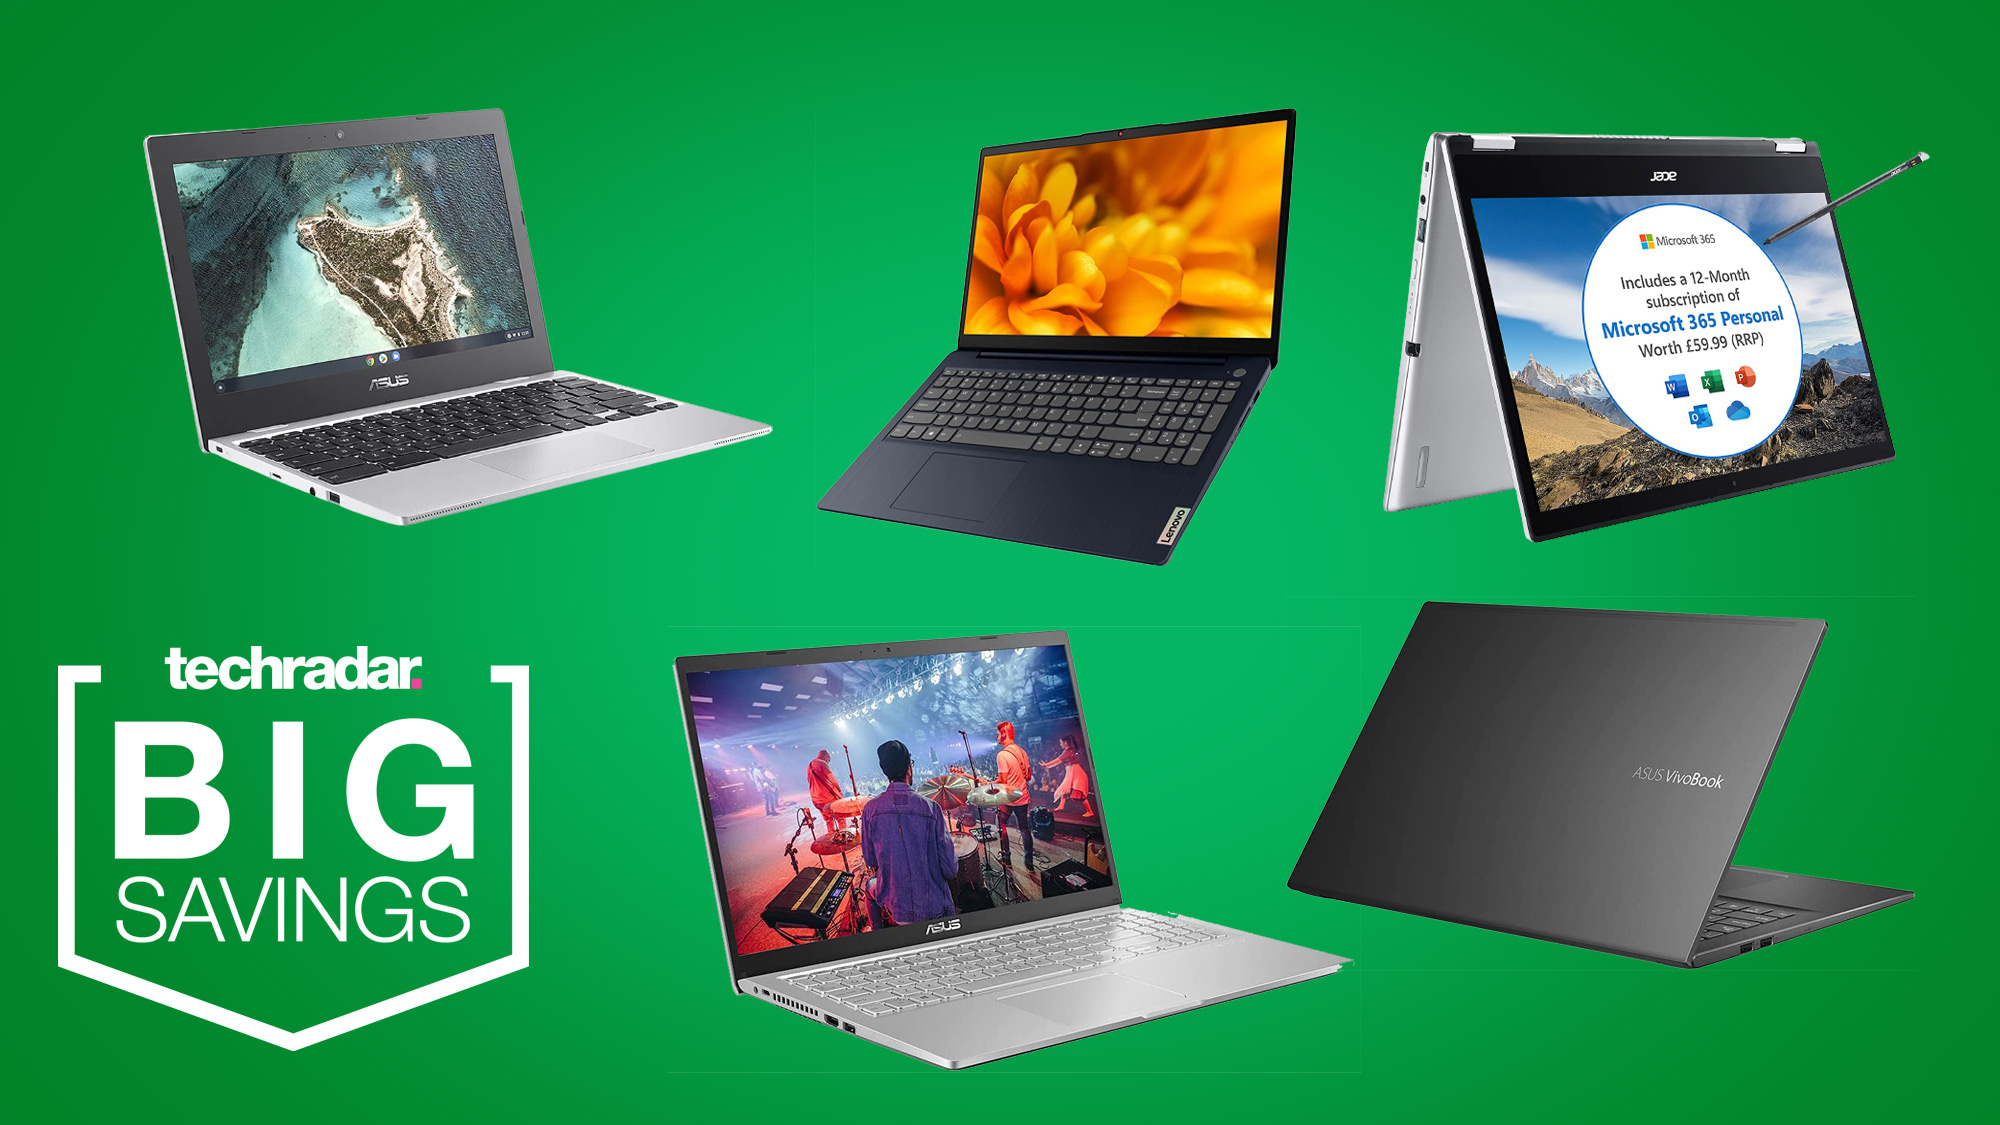 A selection of Asus, Acer and Lenovo laptop deals from the Amazon Spring Sale